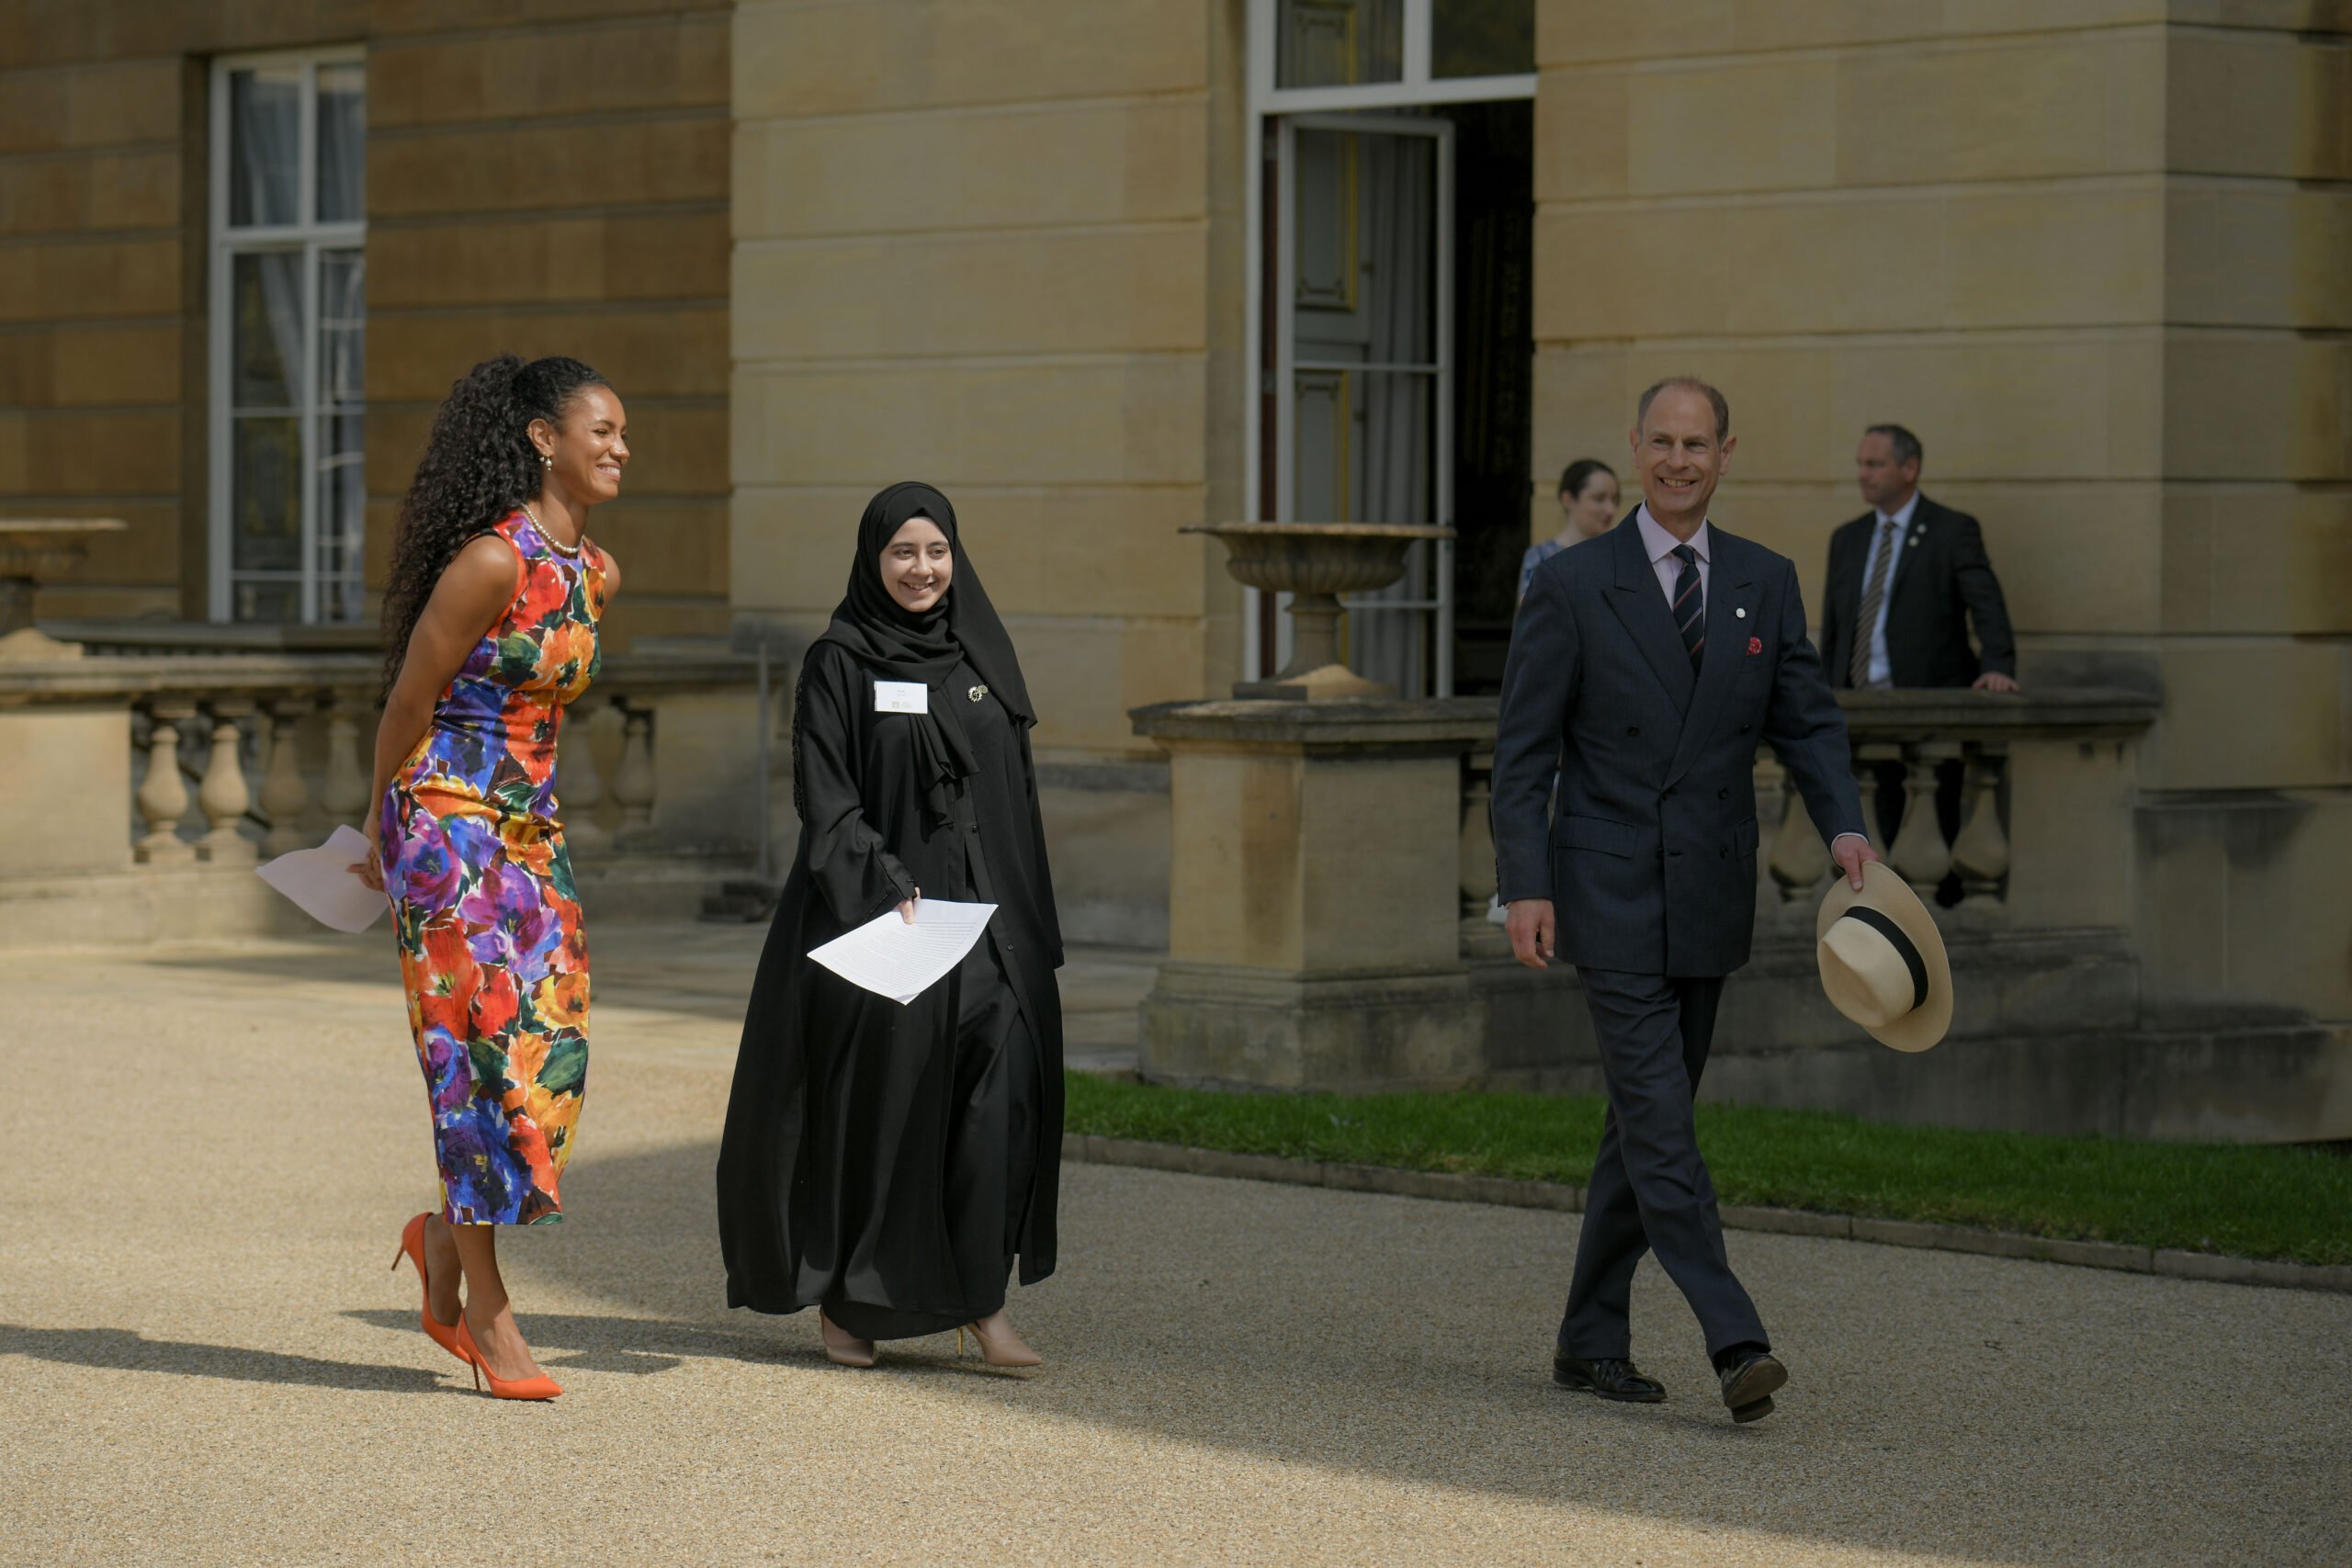 From left to right: Vick Hope, Ifrah Shafiq and HRH The Duke of Edinburgh walking on the West Terrace of Buckingham Palace.